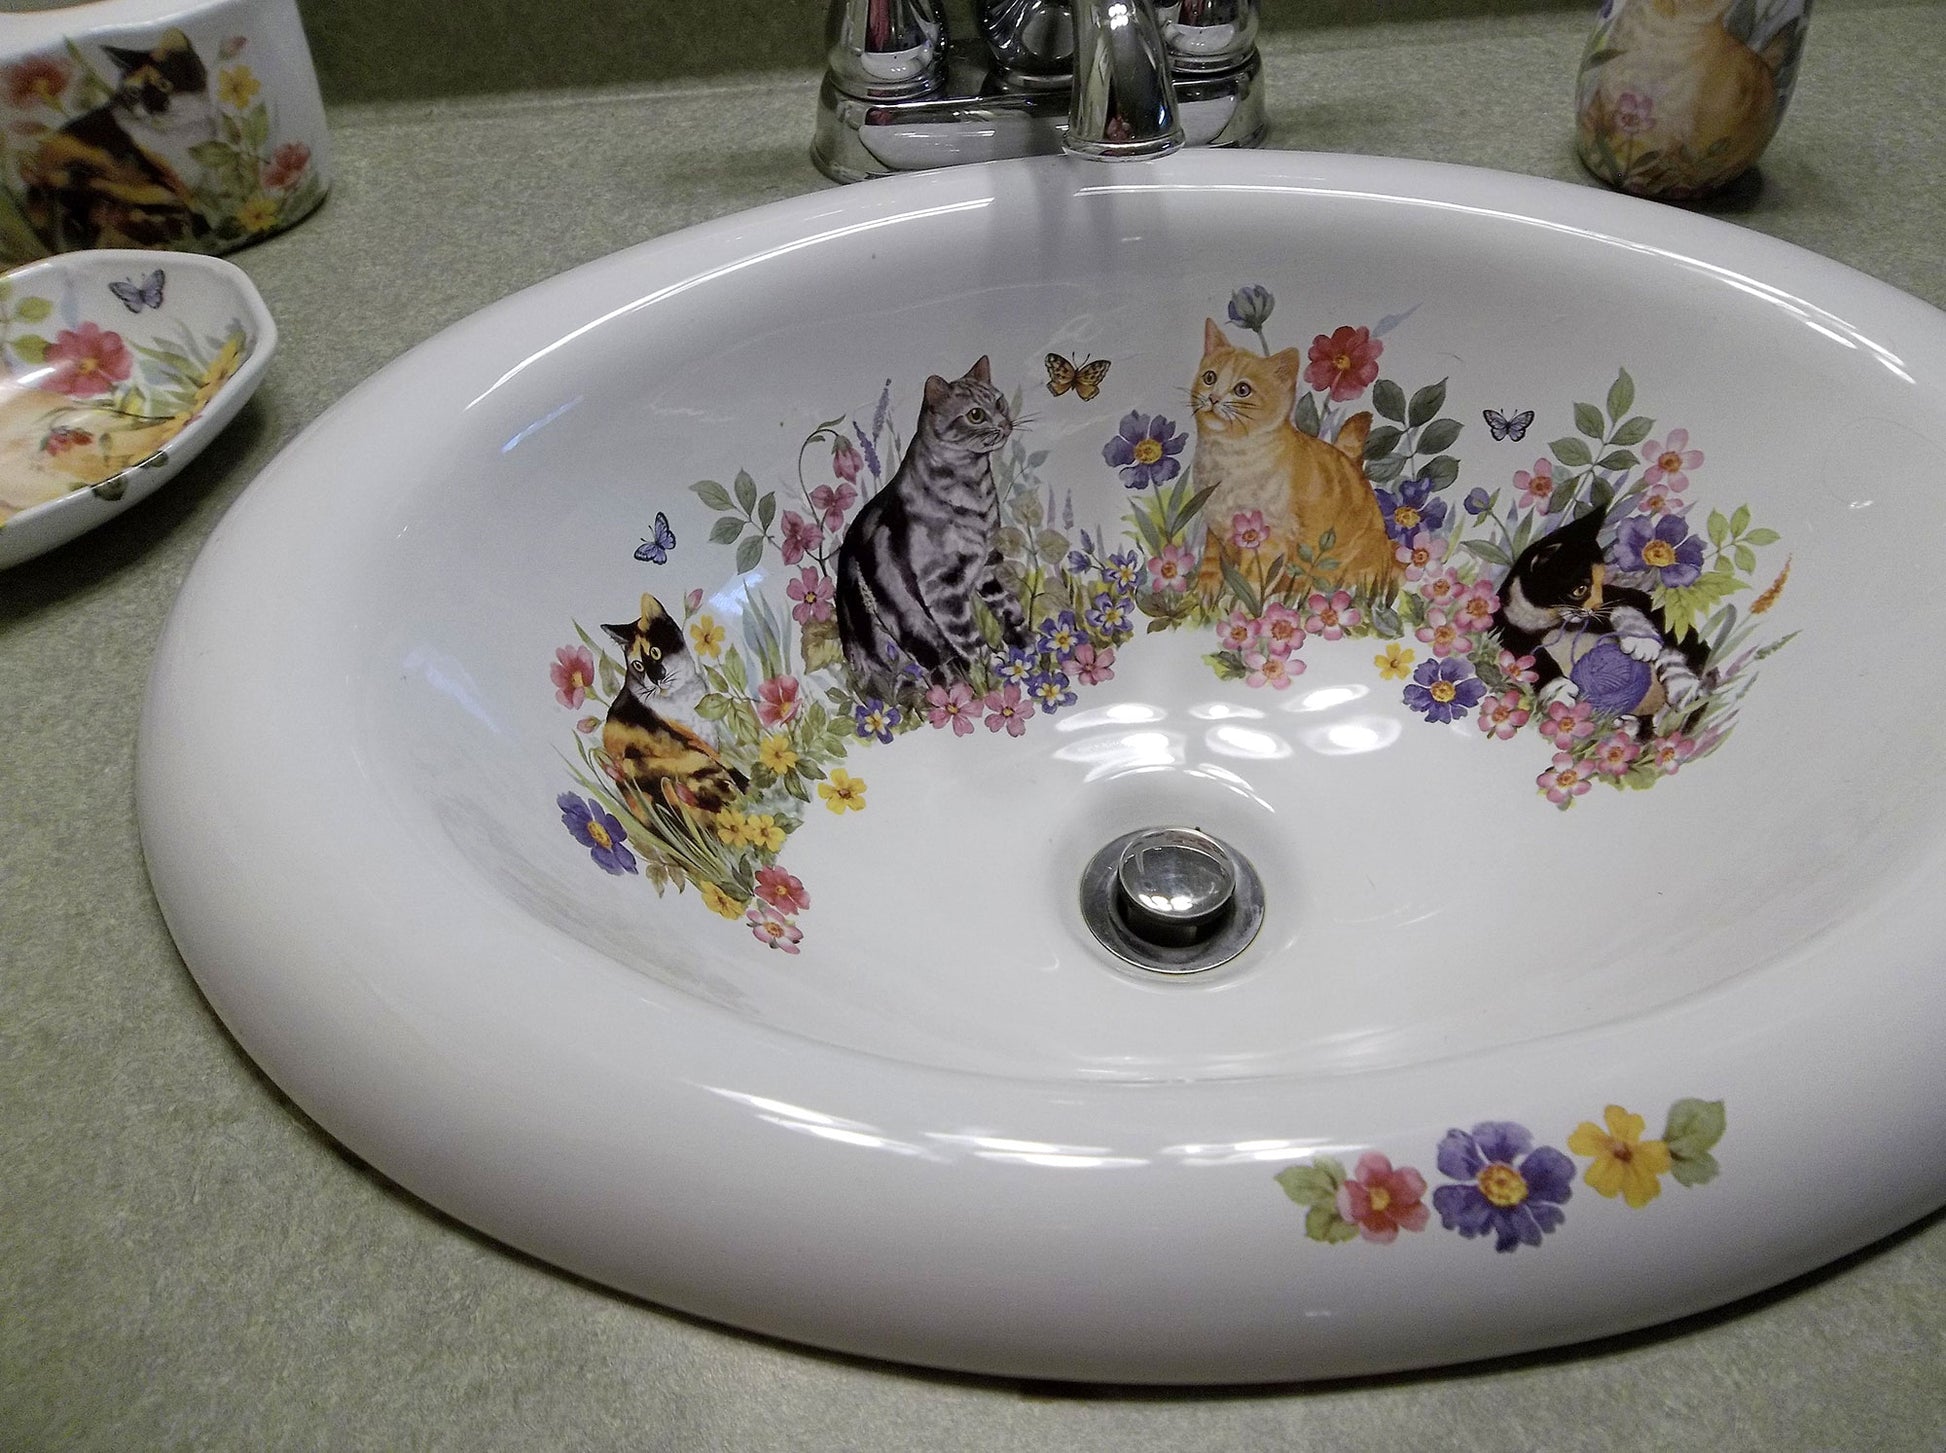 Bathroom with Cats in the Garden Painted sink and matching cat ceramic bathroom accessories.